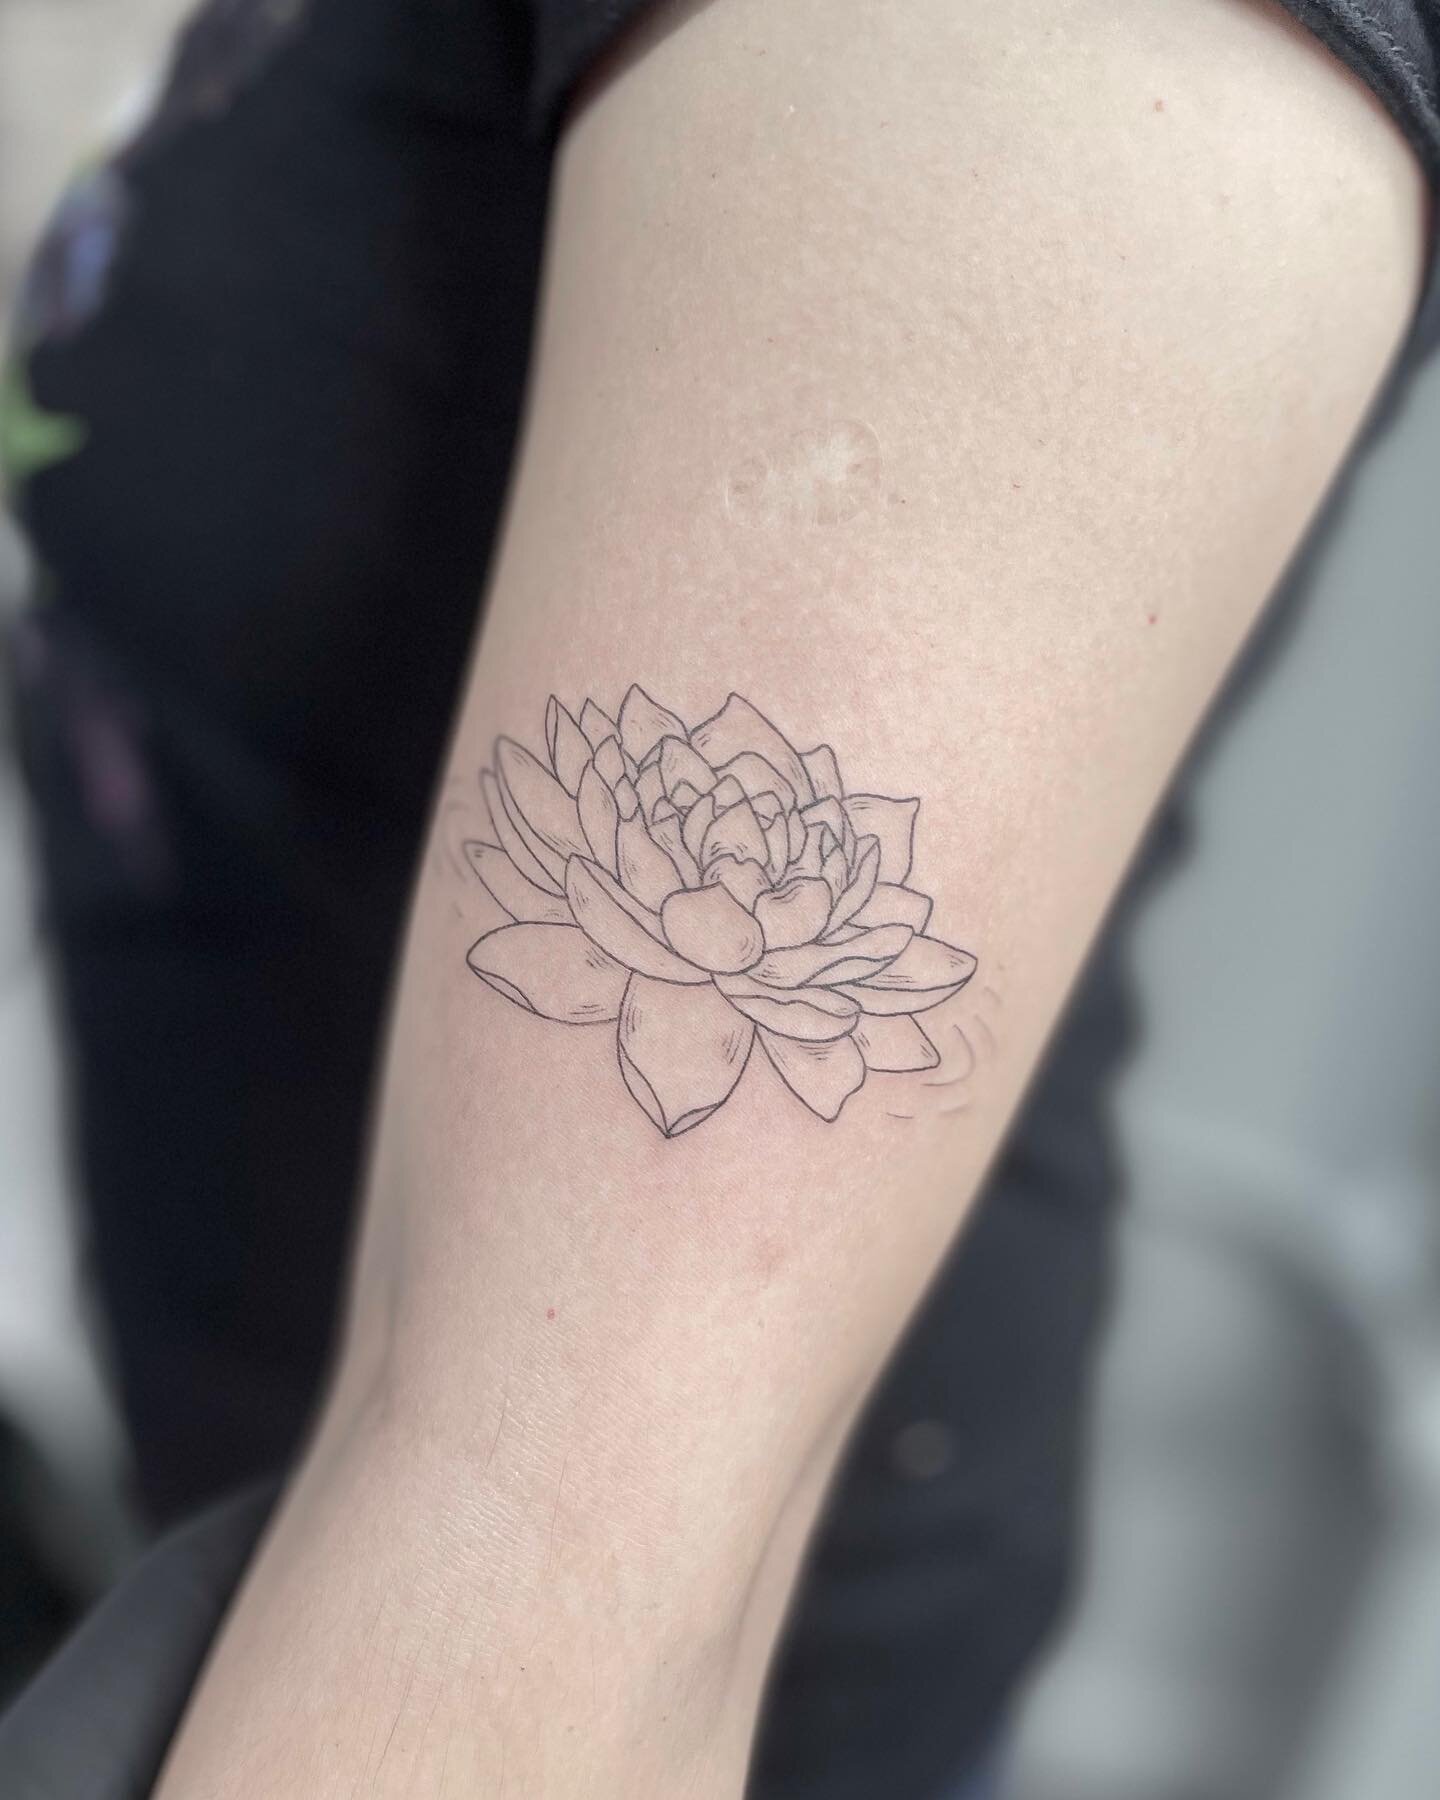 Thank you so much @jademwong for coming in and getting this special lotus piece! 🪷✨ ( Beautiful Poem was written by @jademwong )
.
.
#lotus #lotustattoo #lotusflower #lotusflowertattoo #flower #flowertattoo #water #petals #linework #tattoo #tattooar